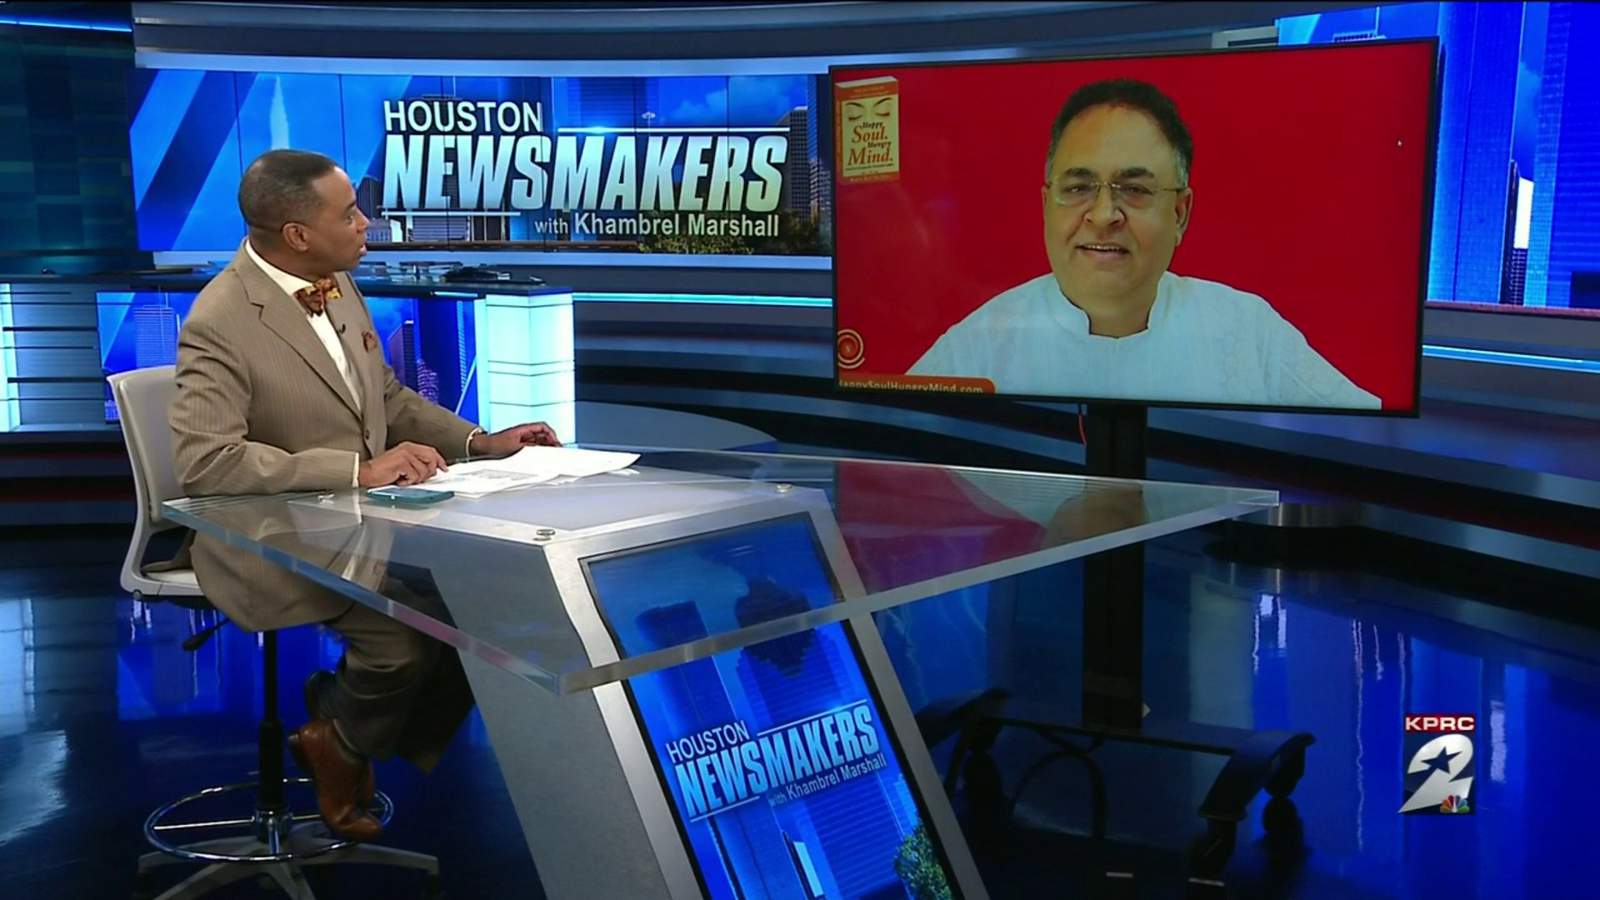 Houston Newsmakers: Religion, Spirituality and feeding the hungry